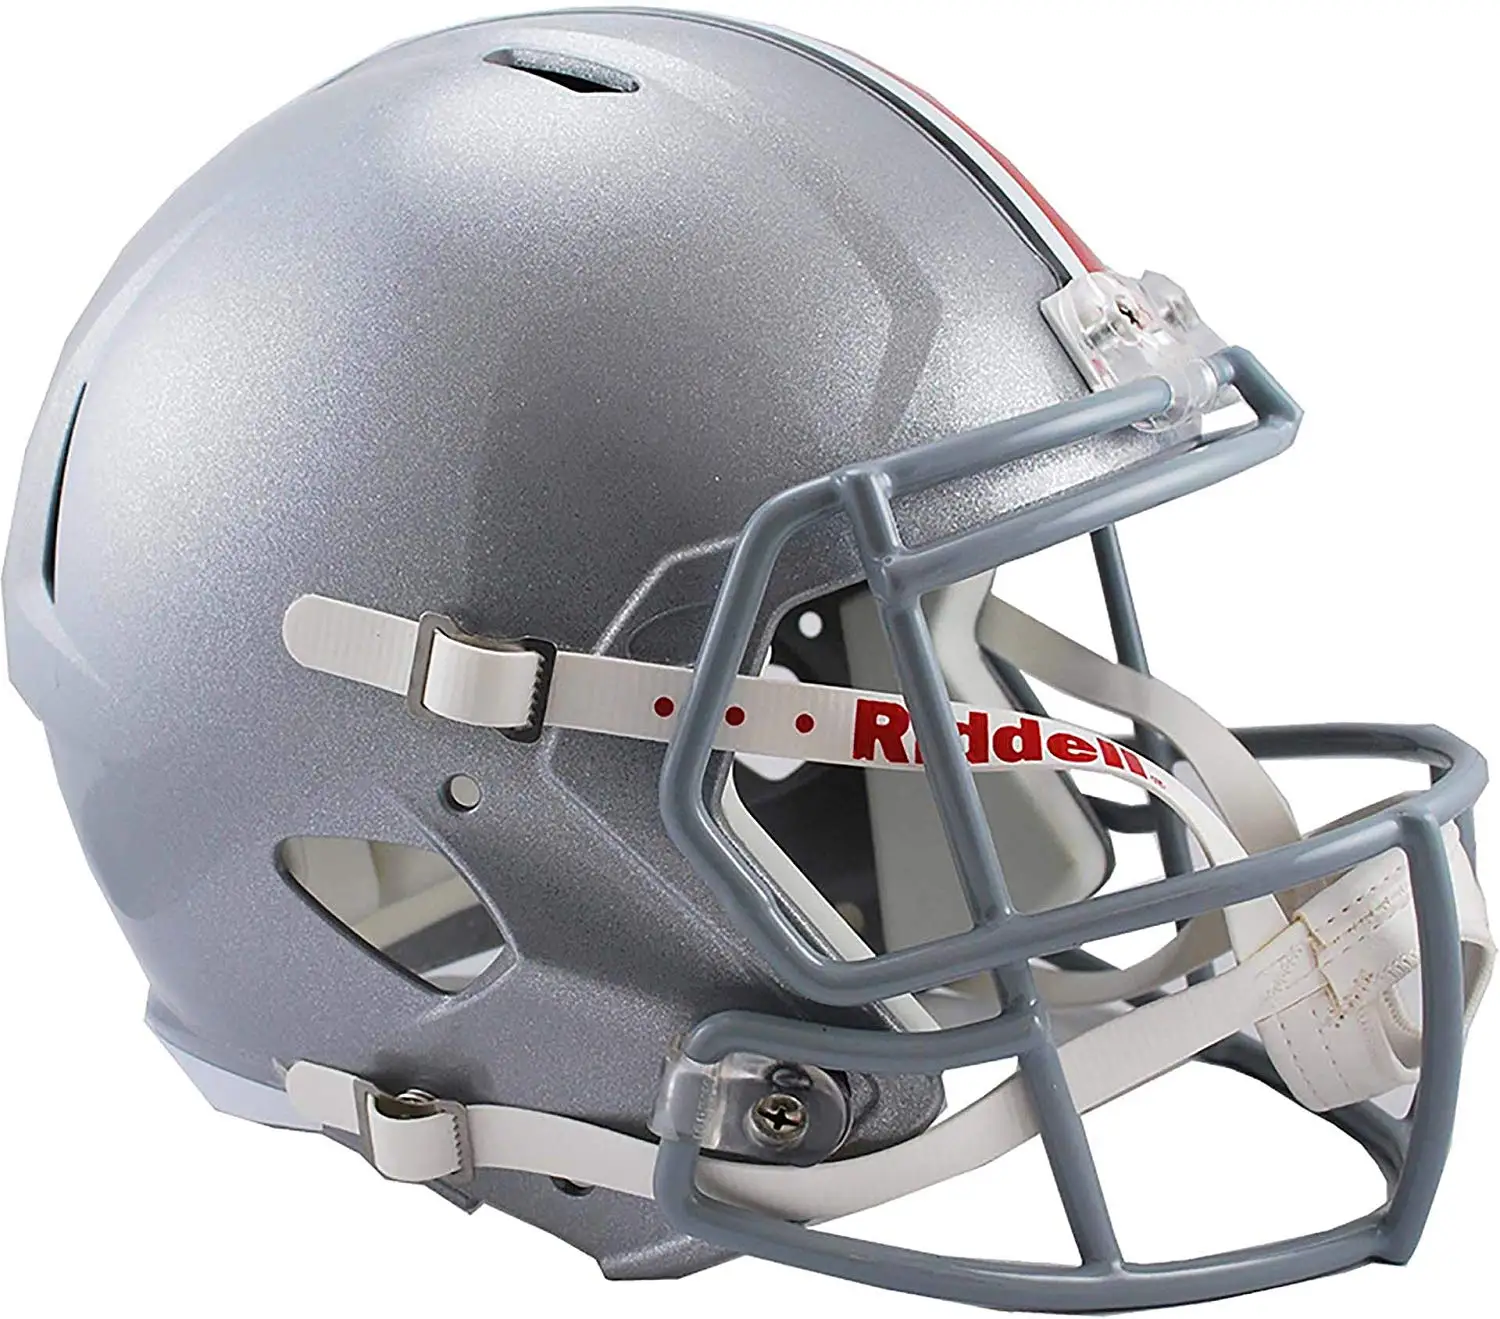 Buy Ohio State Buckeyes full size football helmet decals stripe/10 awards 20m in Cheap Price on ...